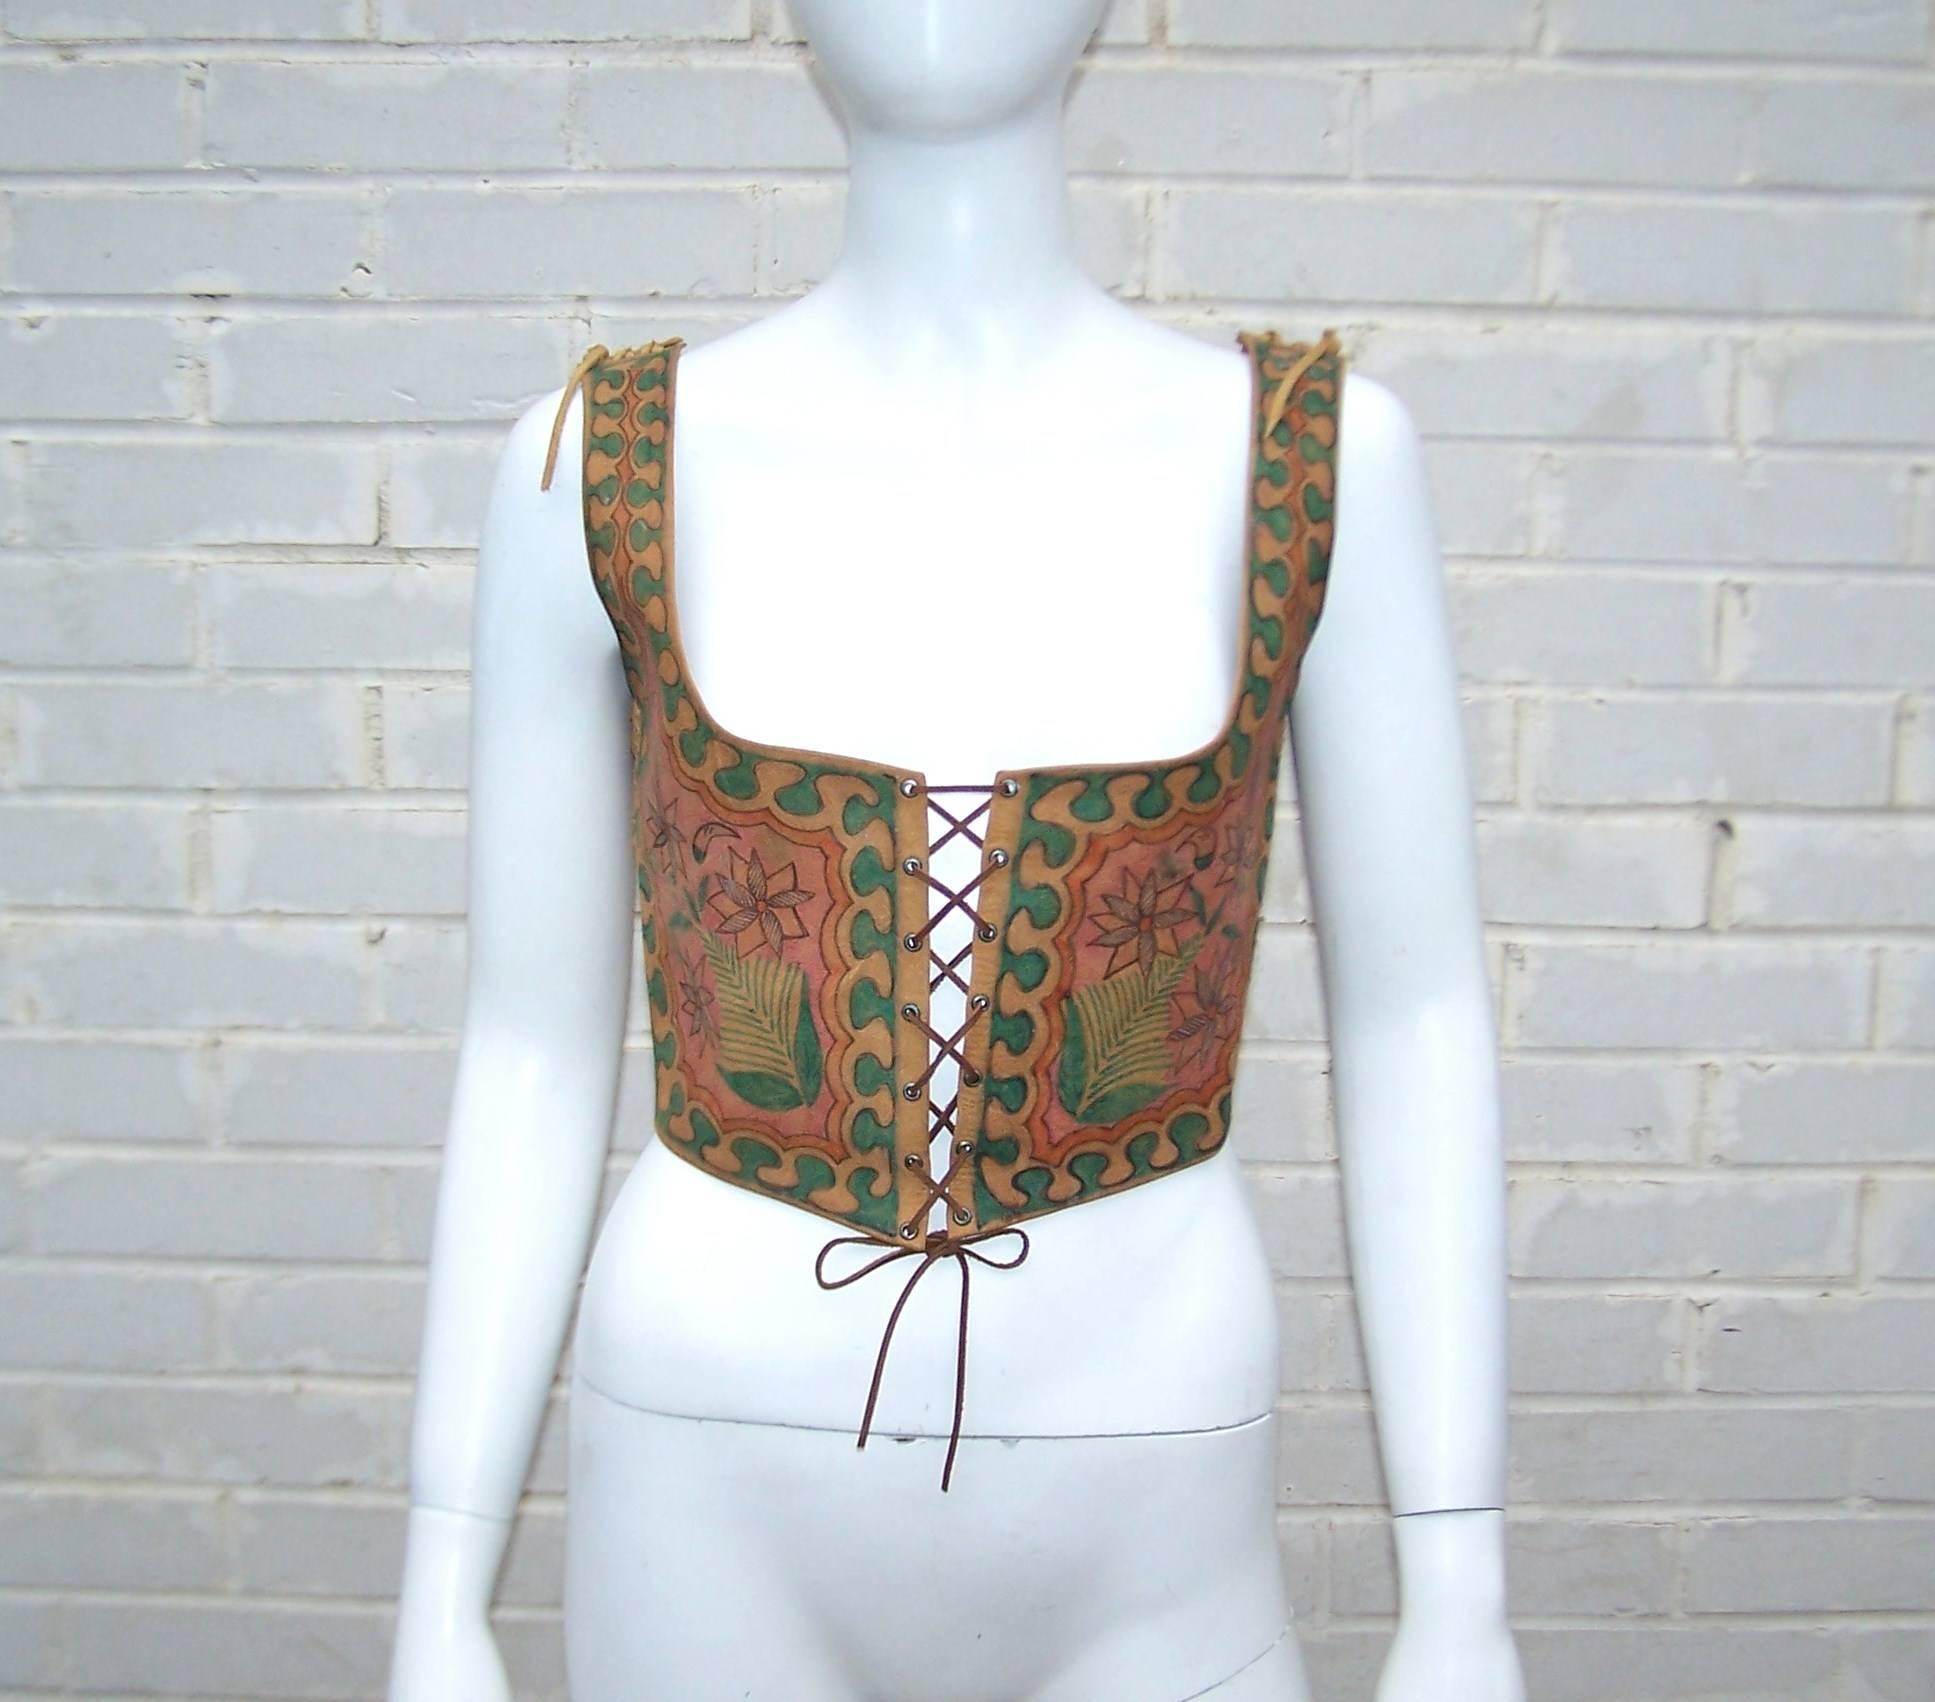 Whether or not you're a pirate, a good wench vest can really come in handy.  Especially when it is a cool hand painted design from Charlotte Blankenship de Vasquez and her Char 'Hecho en Mexico' label.  This early 1970's piece is the classic corset